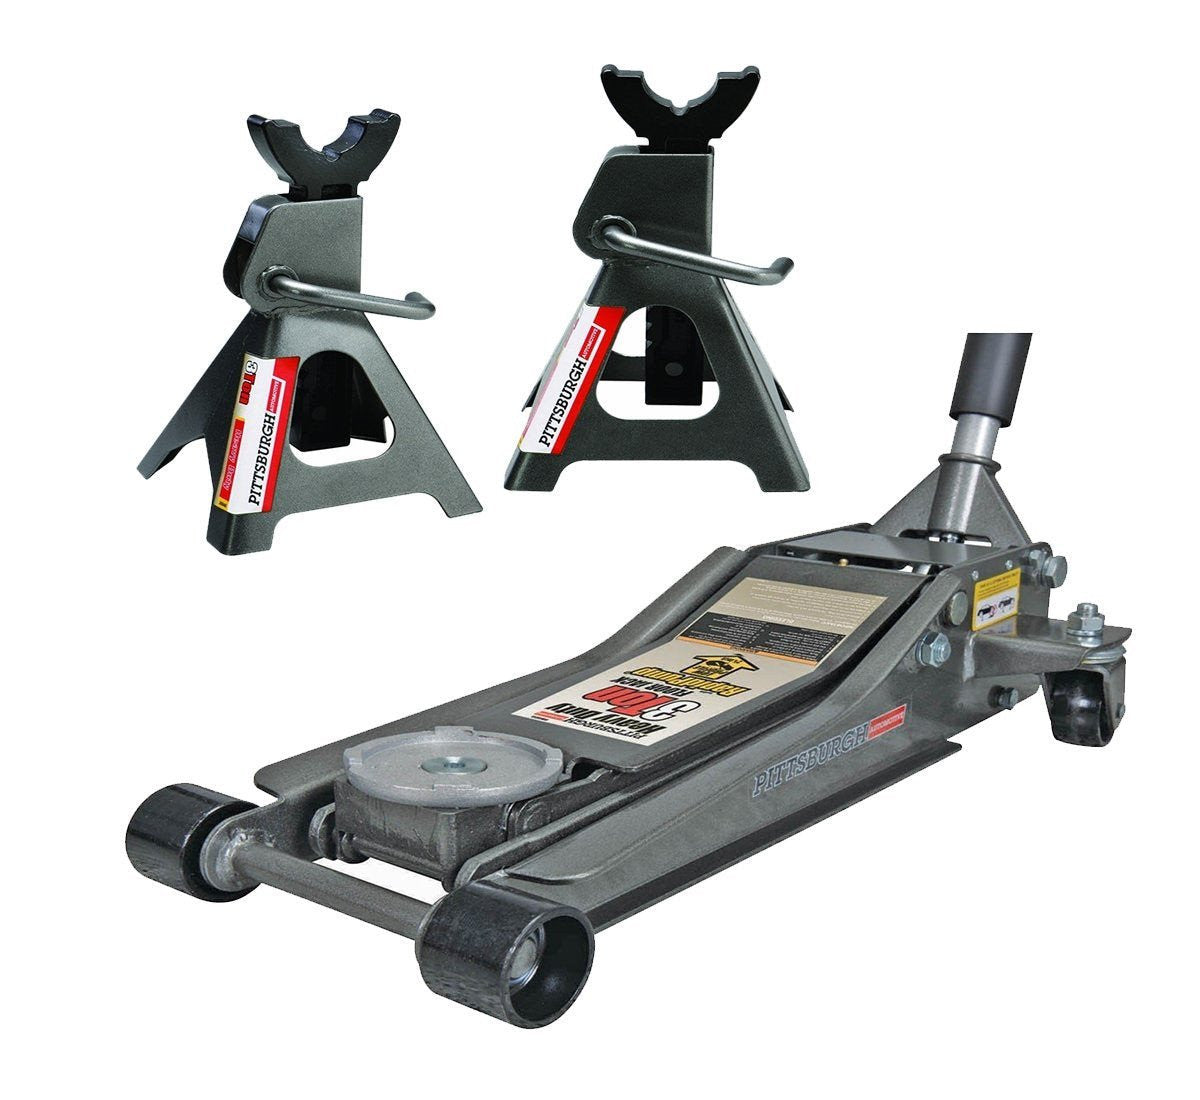 Pittsburg 3 Ton Low Profile Floor Jack and Jack Stands Set Combo with Rapid Pump Quick Lift